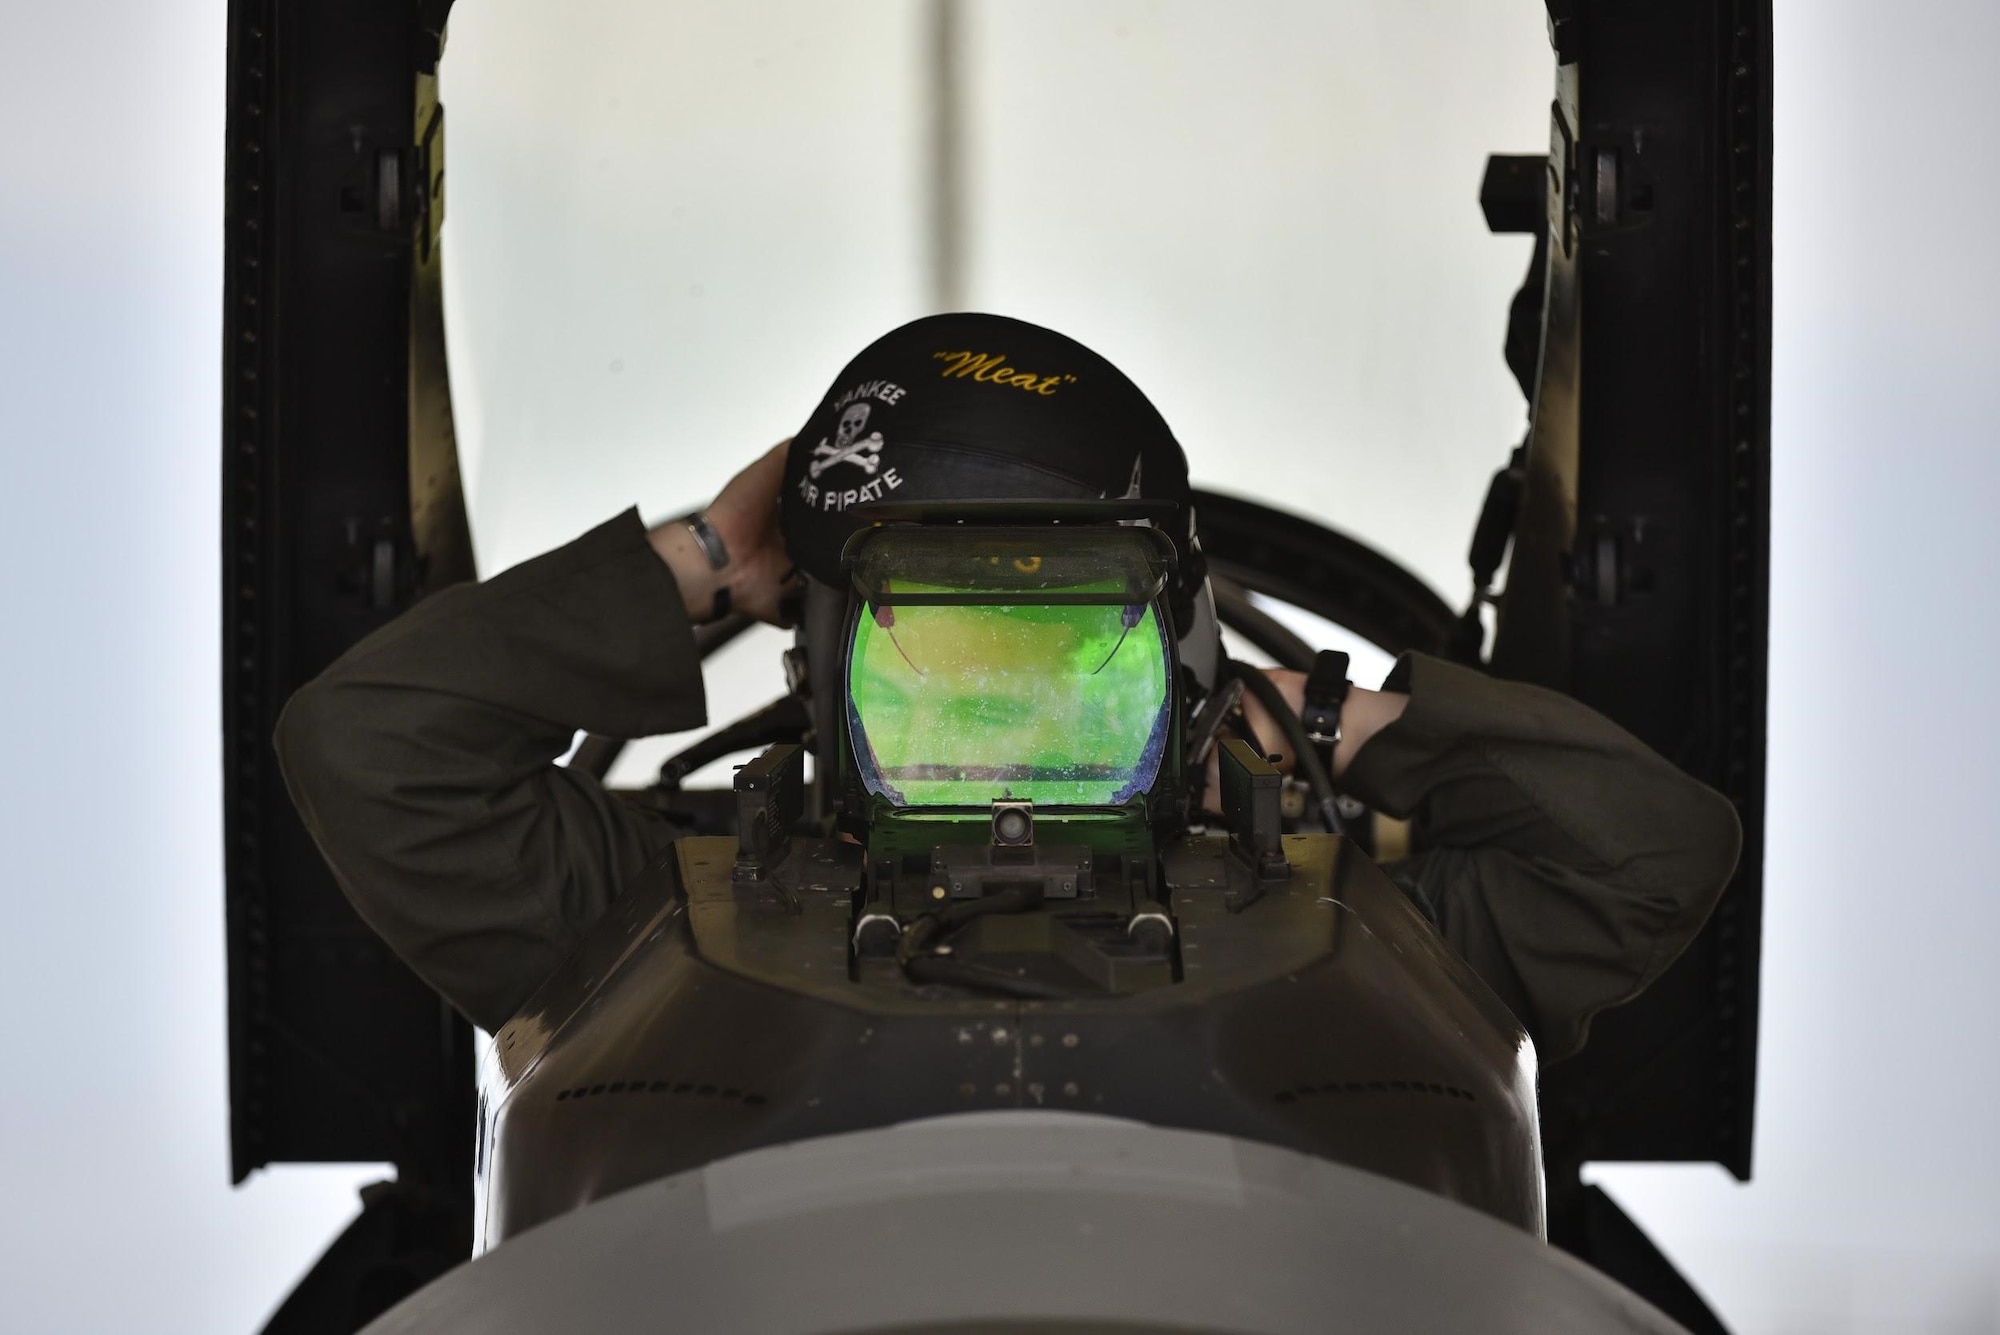 Maj. Houston “Meat” Pye, 8th Fighter Wing chief of safety and 80th Fighter Squadron pilot, dons his pilot helmet before flight at Kunsan Air Base, Republic of Korea, Aug. 31, 2020.